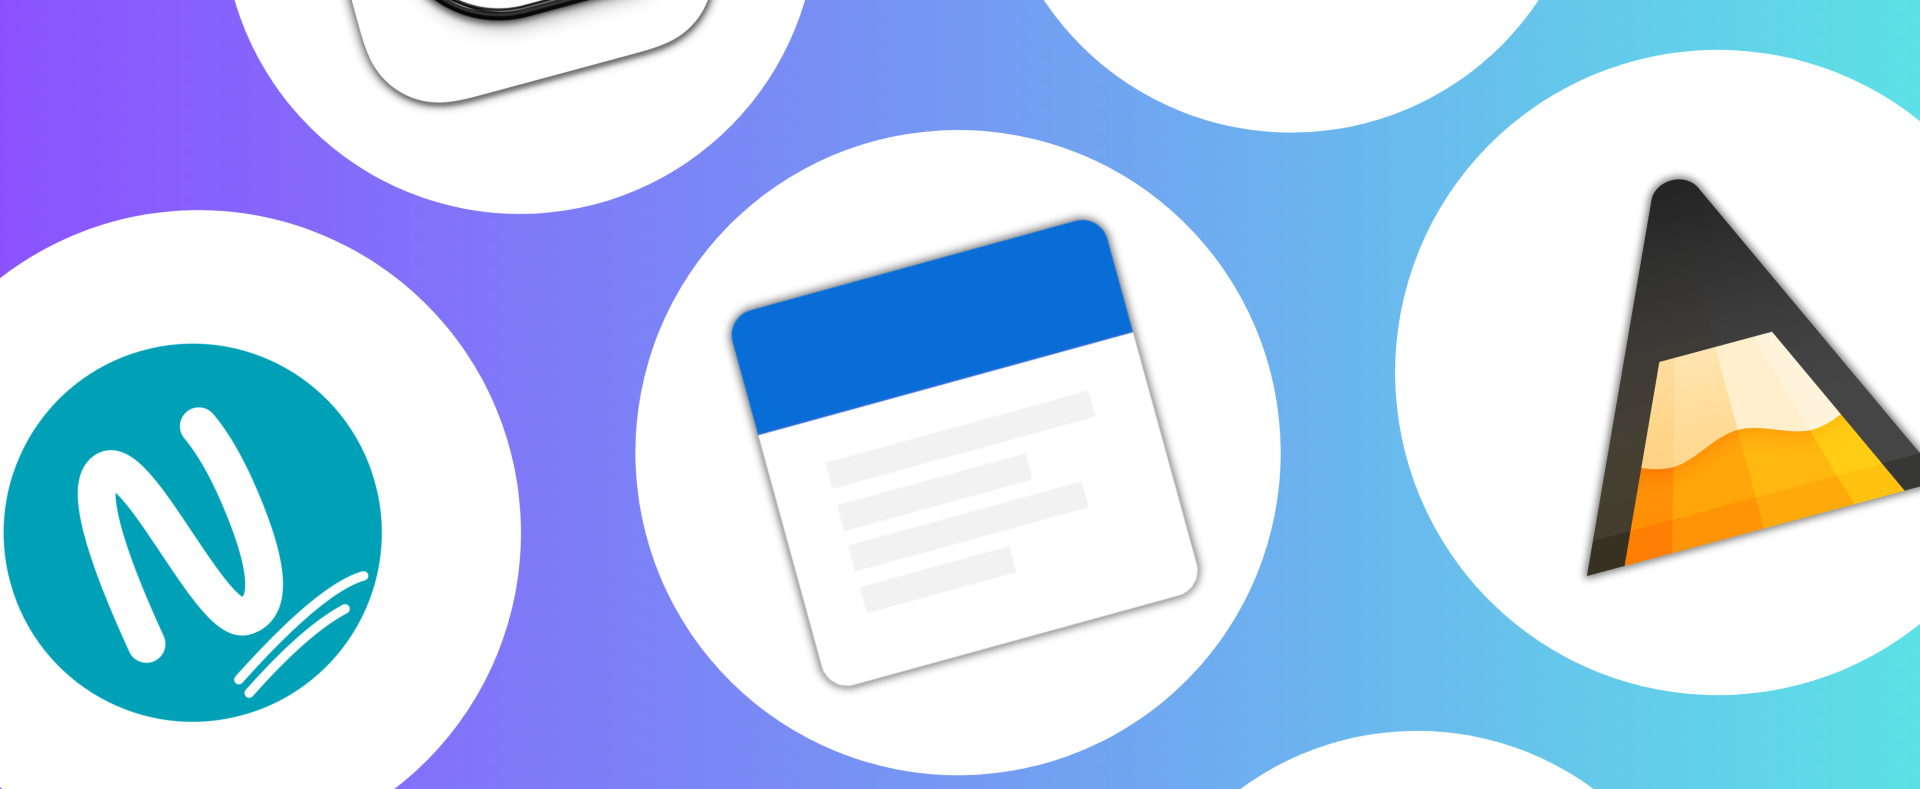 Best 10 Note-Taking Apps: 2023 Recommendations thumbnail image